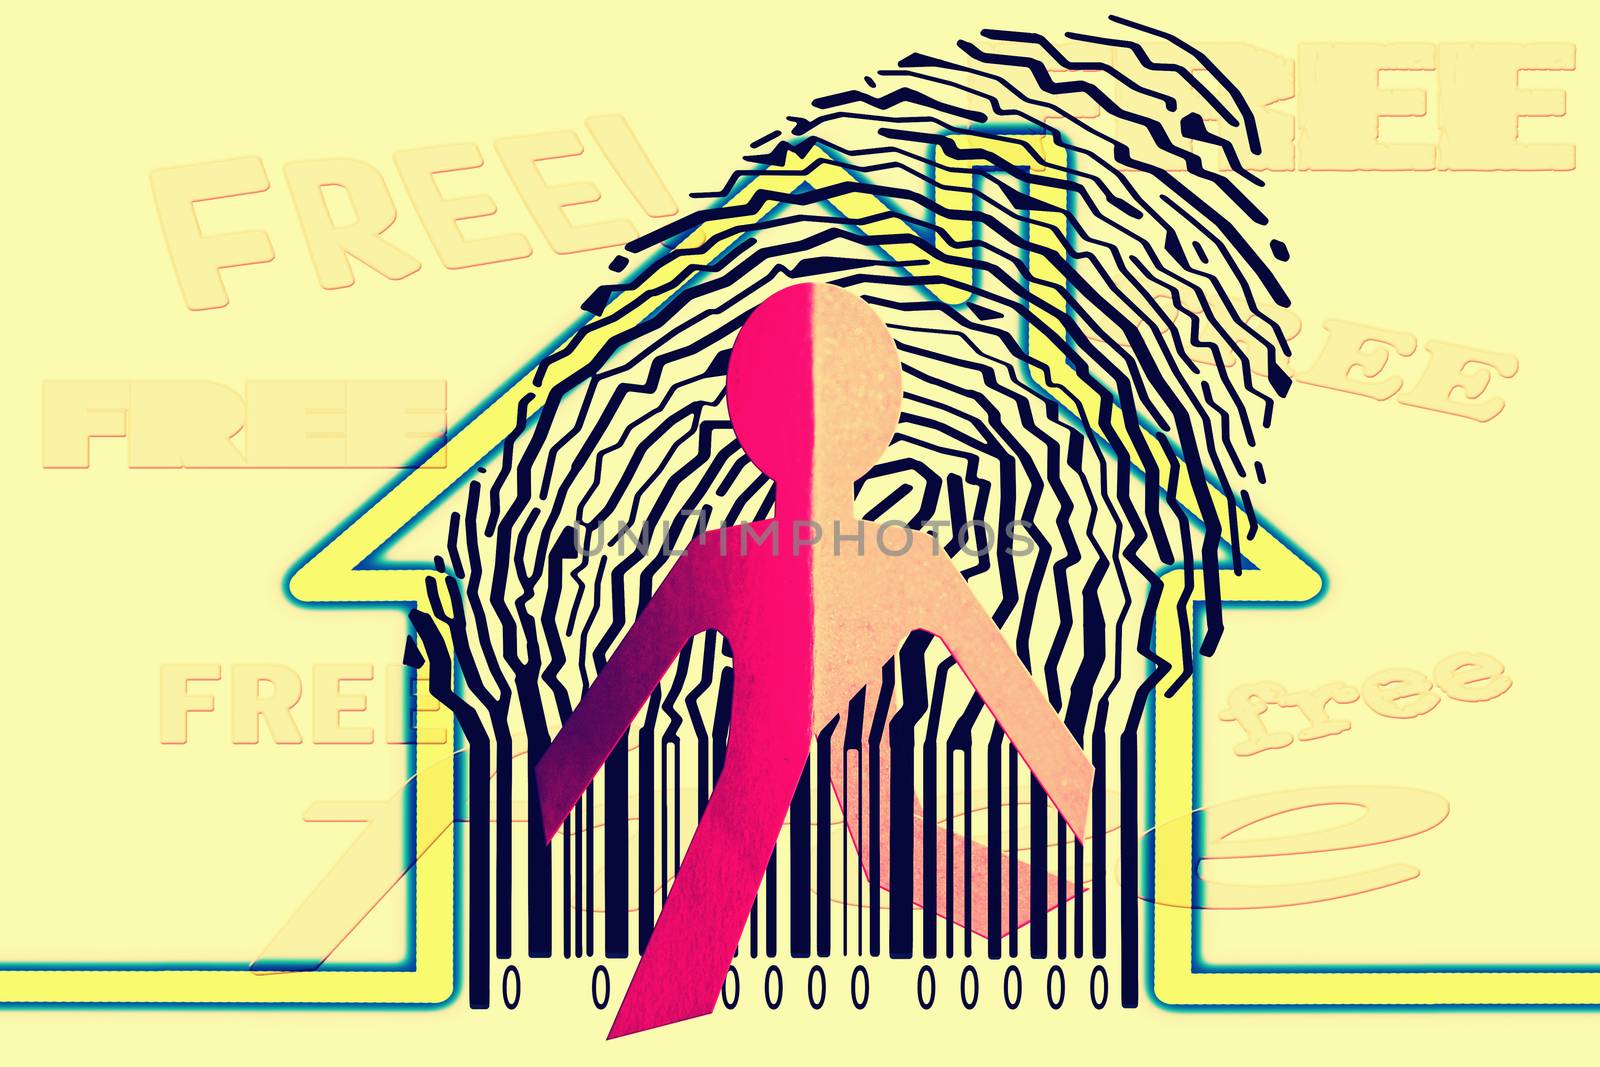 Paperman coming out of a bar code with Home Symbol by yands